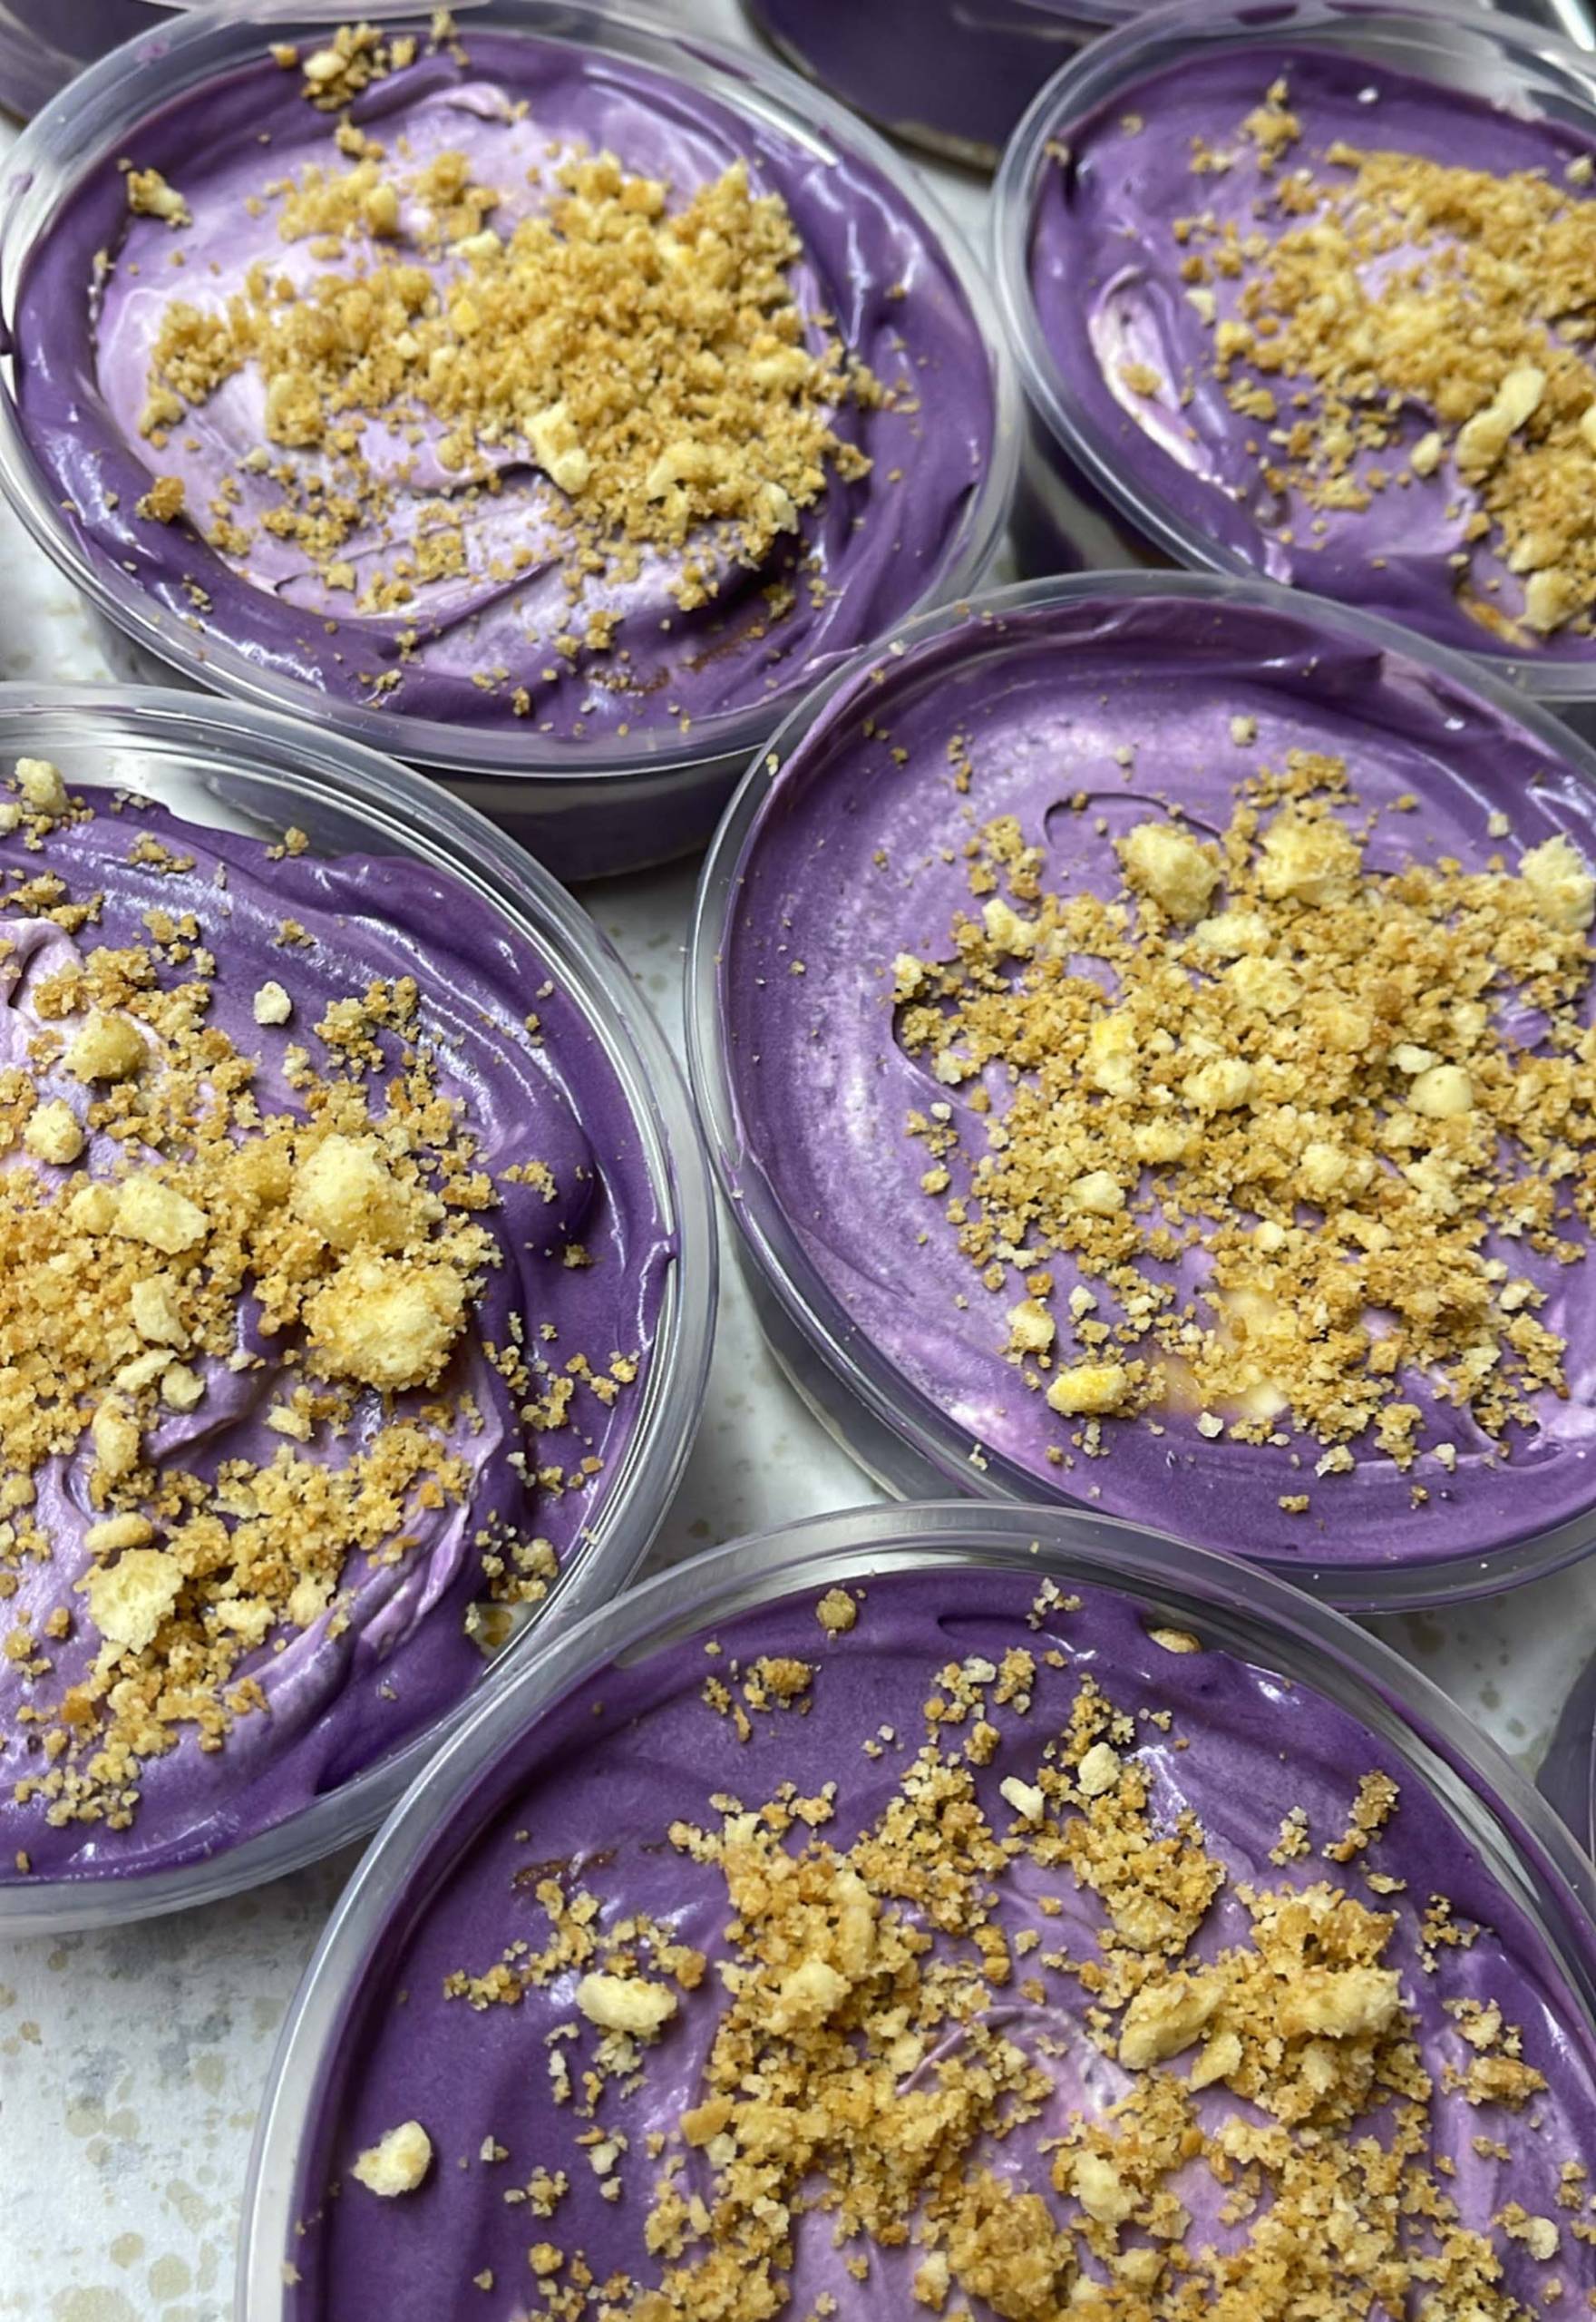 Small jars of purple banana-ube cream pudding, topped with crushed pistachios.